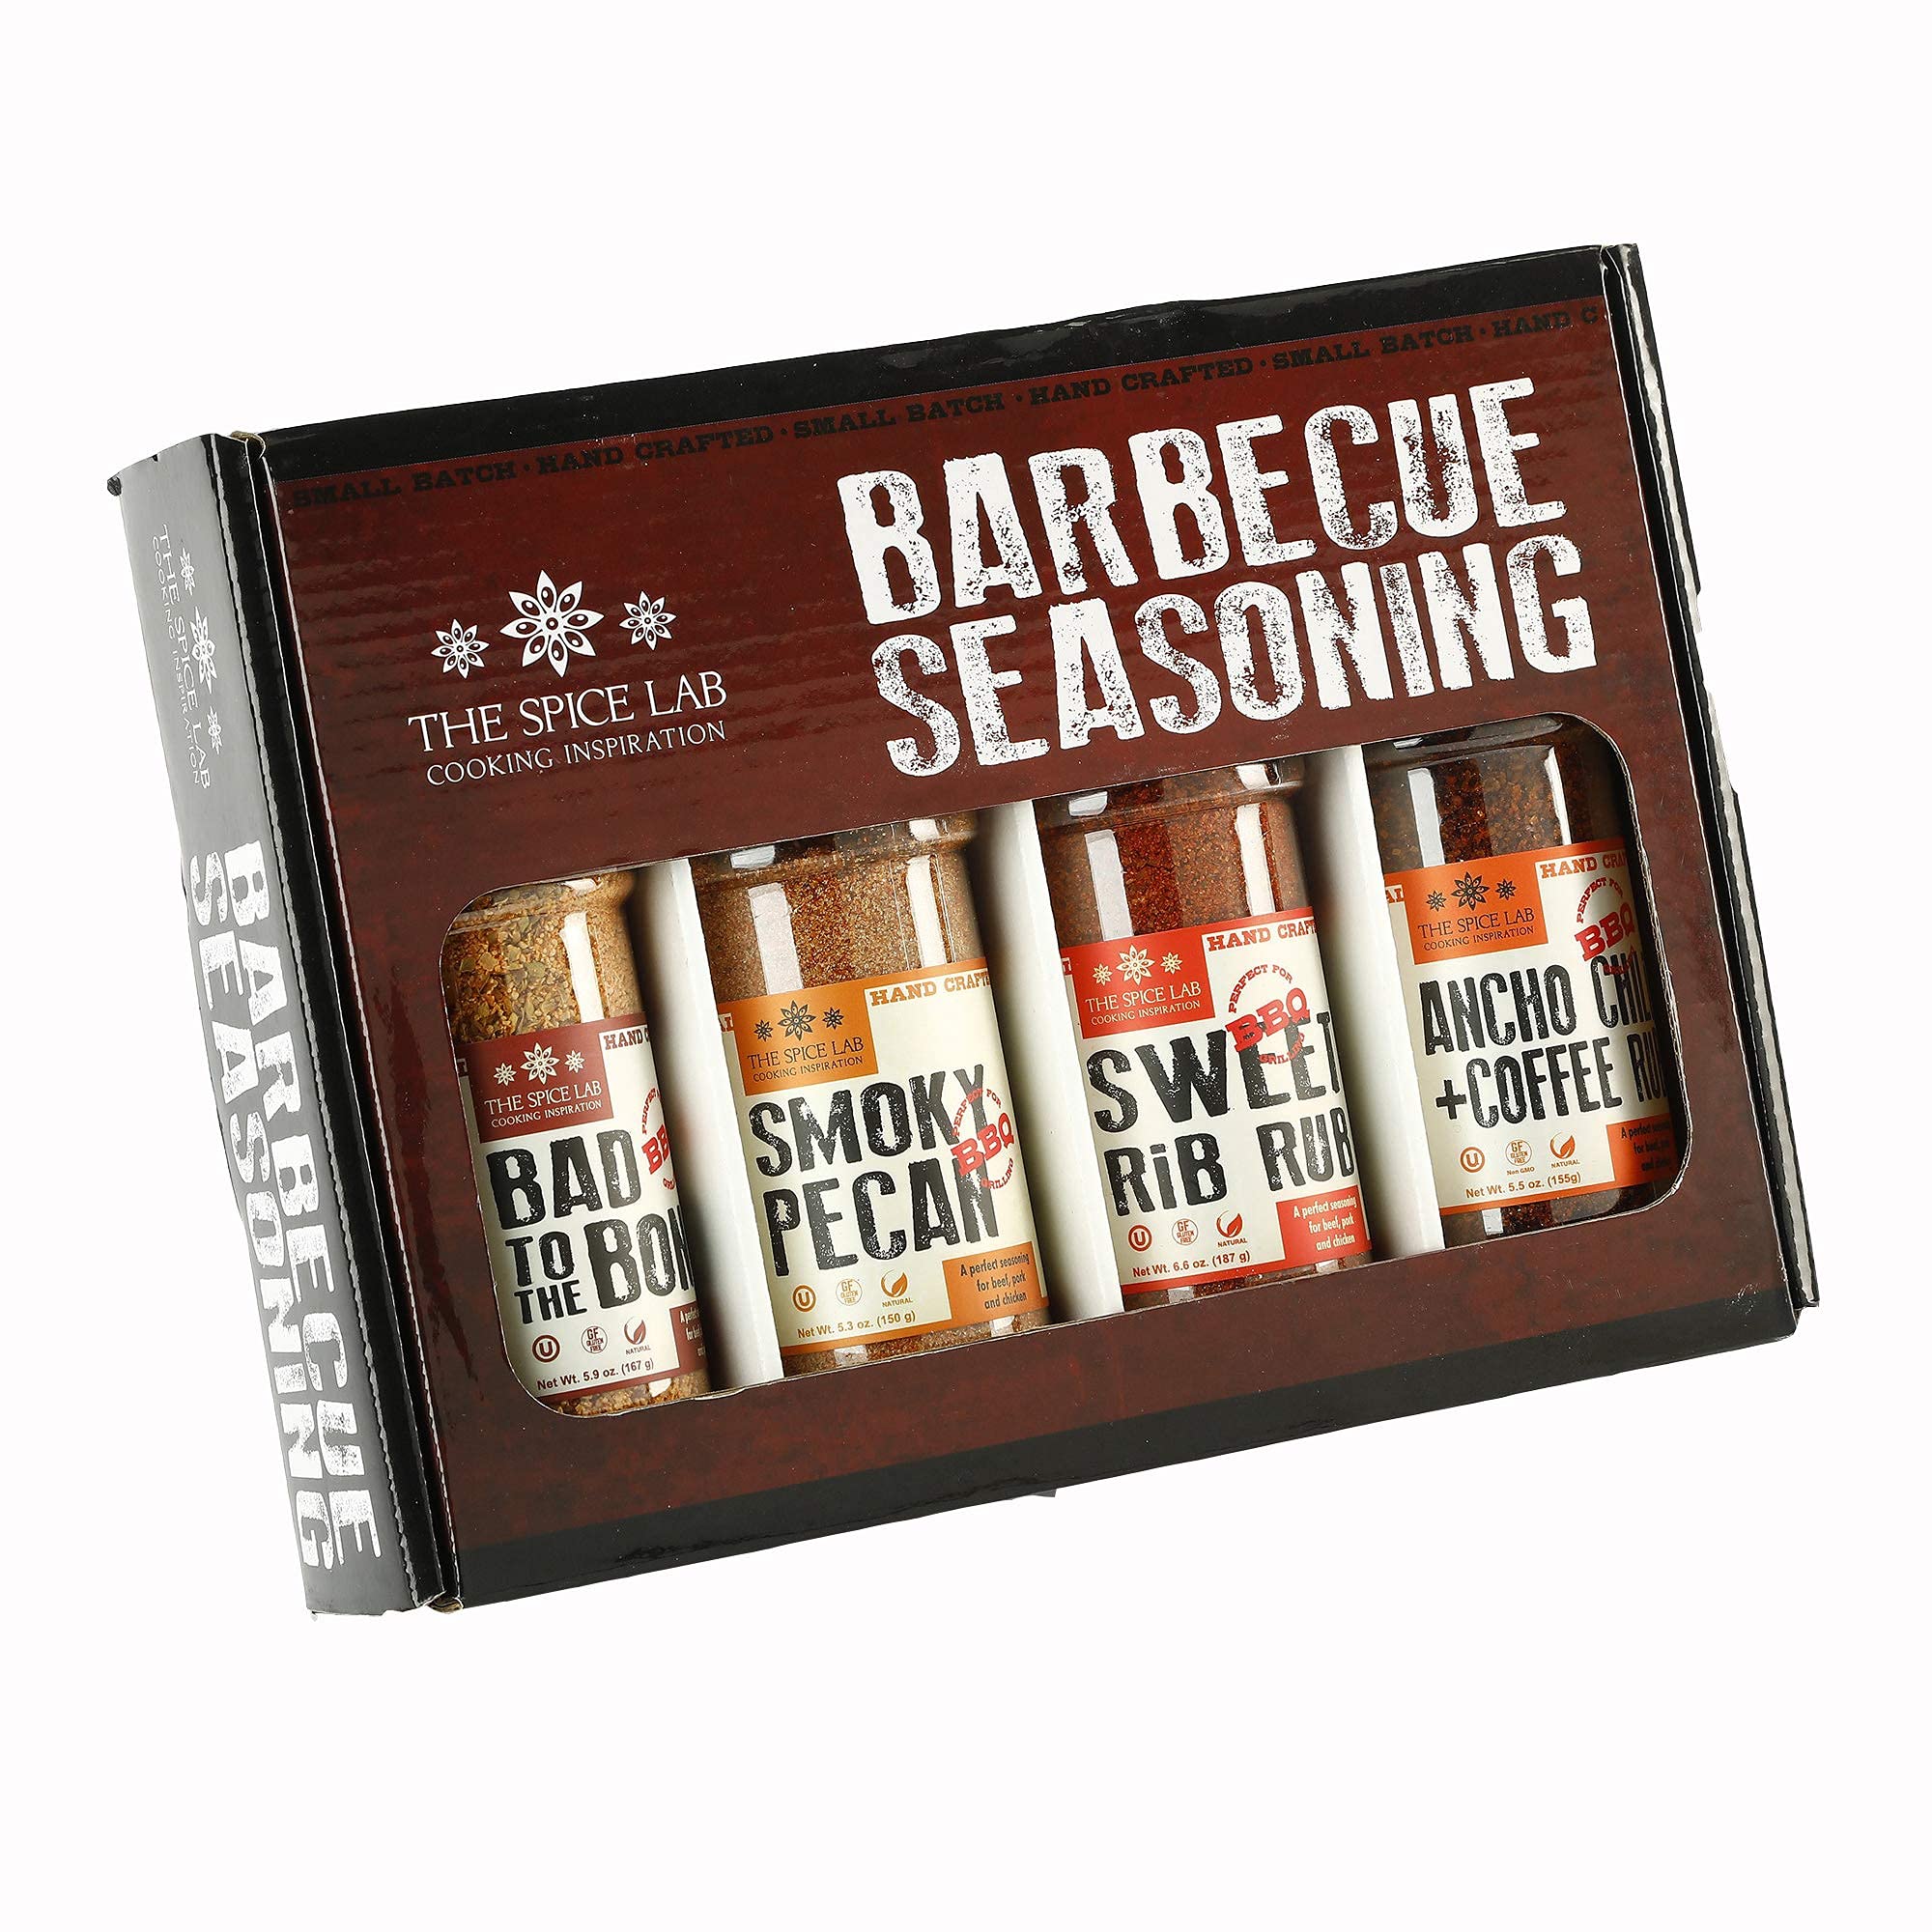  The Spice Lab BBQ Barbecue Spices and Seasonings Set -  Ultimate Grilling Accessories Set - Gift Kit for Barbecues, Grilling, and  Smoking - Great Gift for Men or Gift for